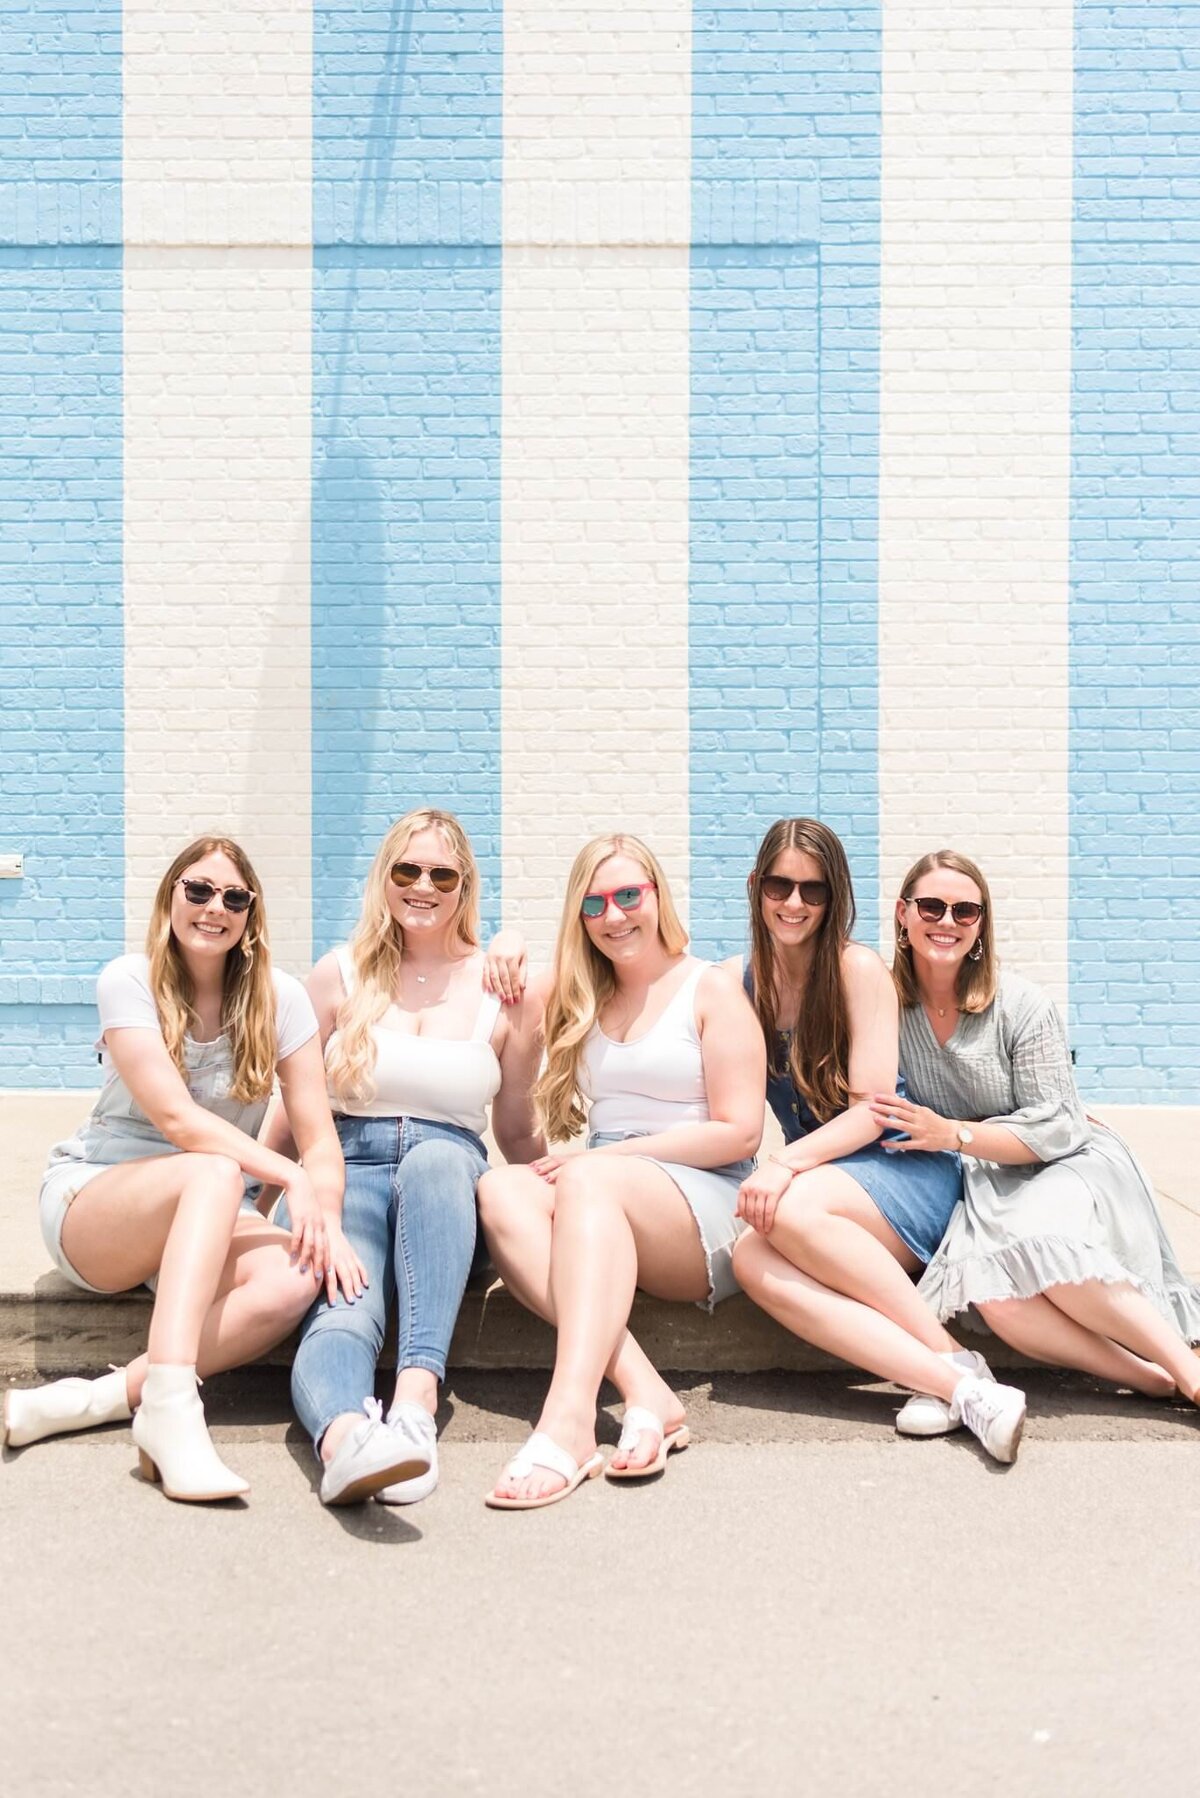 12th-South-Nashville-Bachelorette-Photoshoot-Striped-Blue-and-White-Wall+2